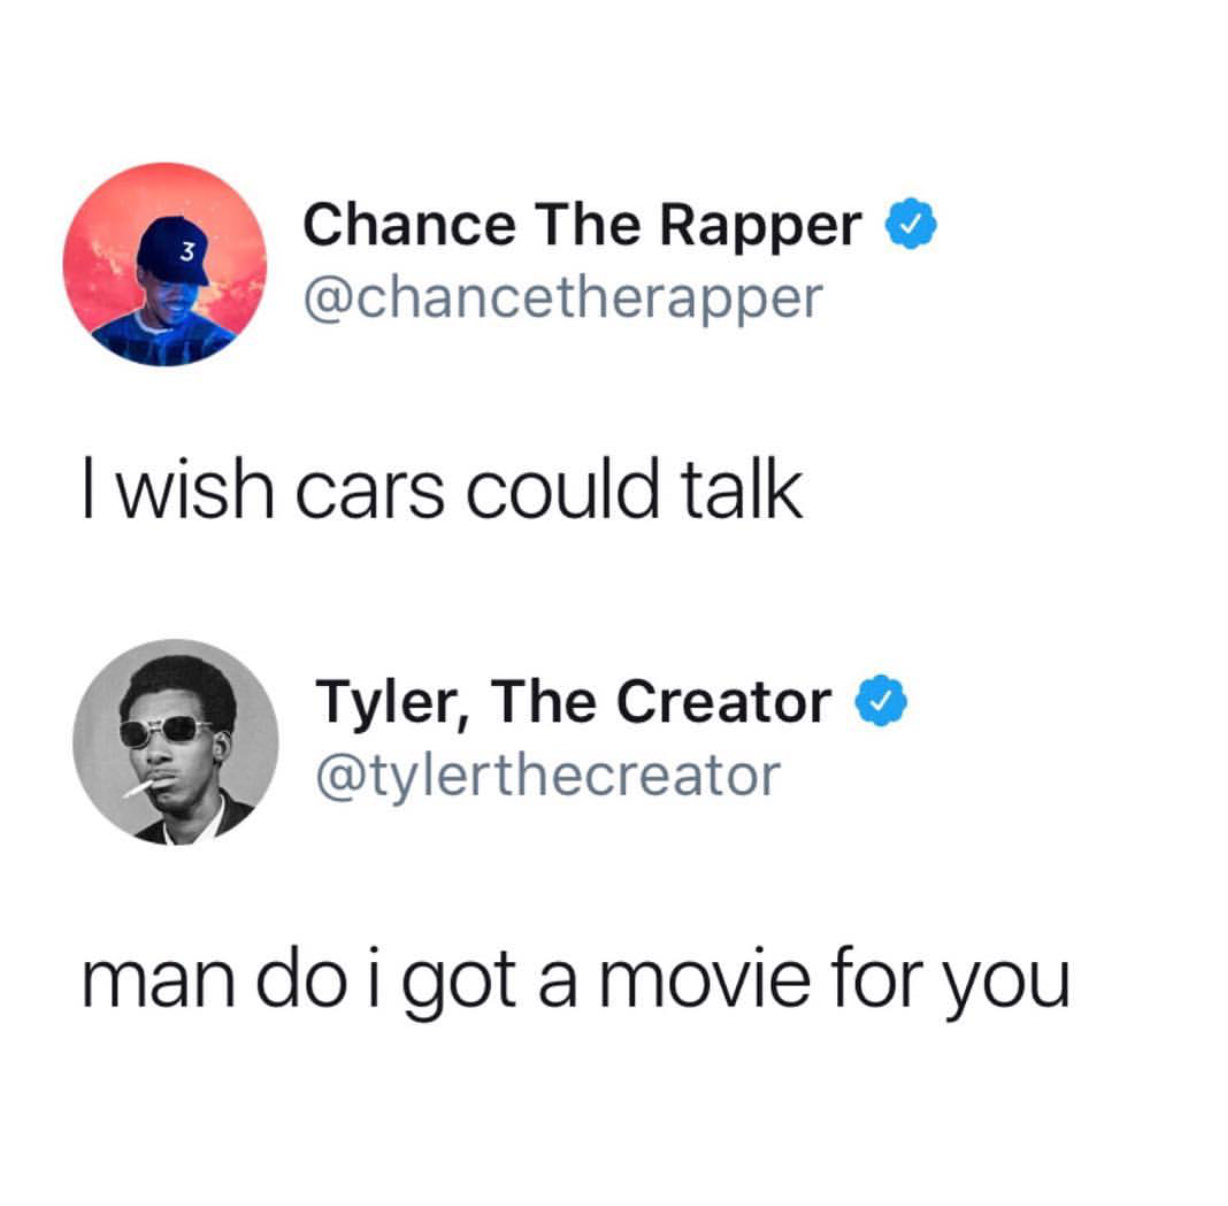 Tyler, the Creator - 3 Chance The Rapper I wish cars could talk Tyler, The Creator man do i got a movie for you